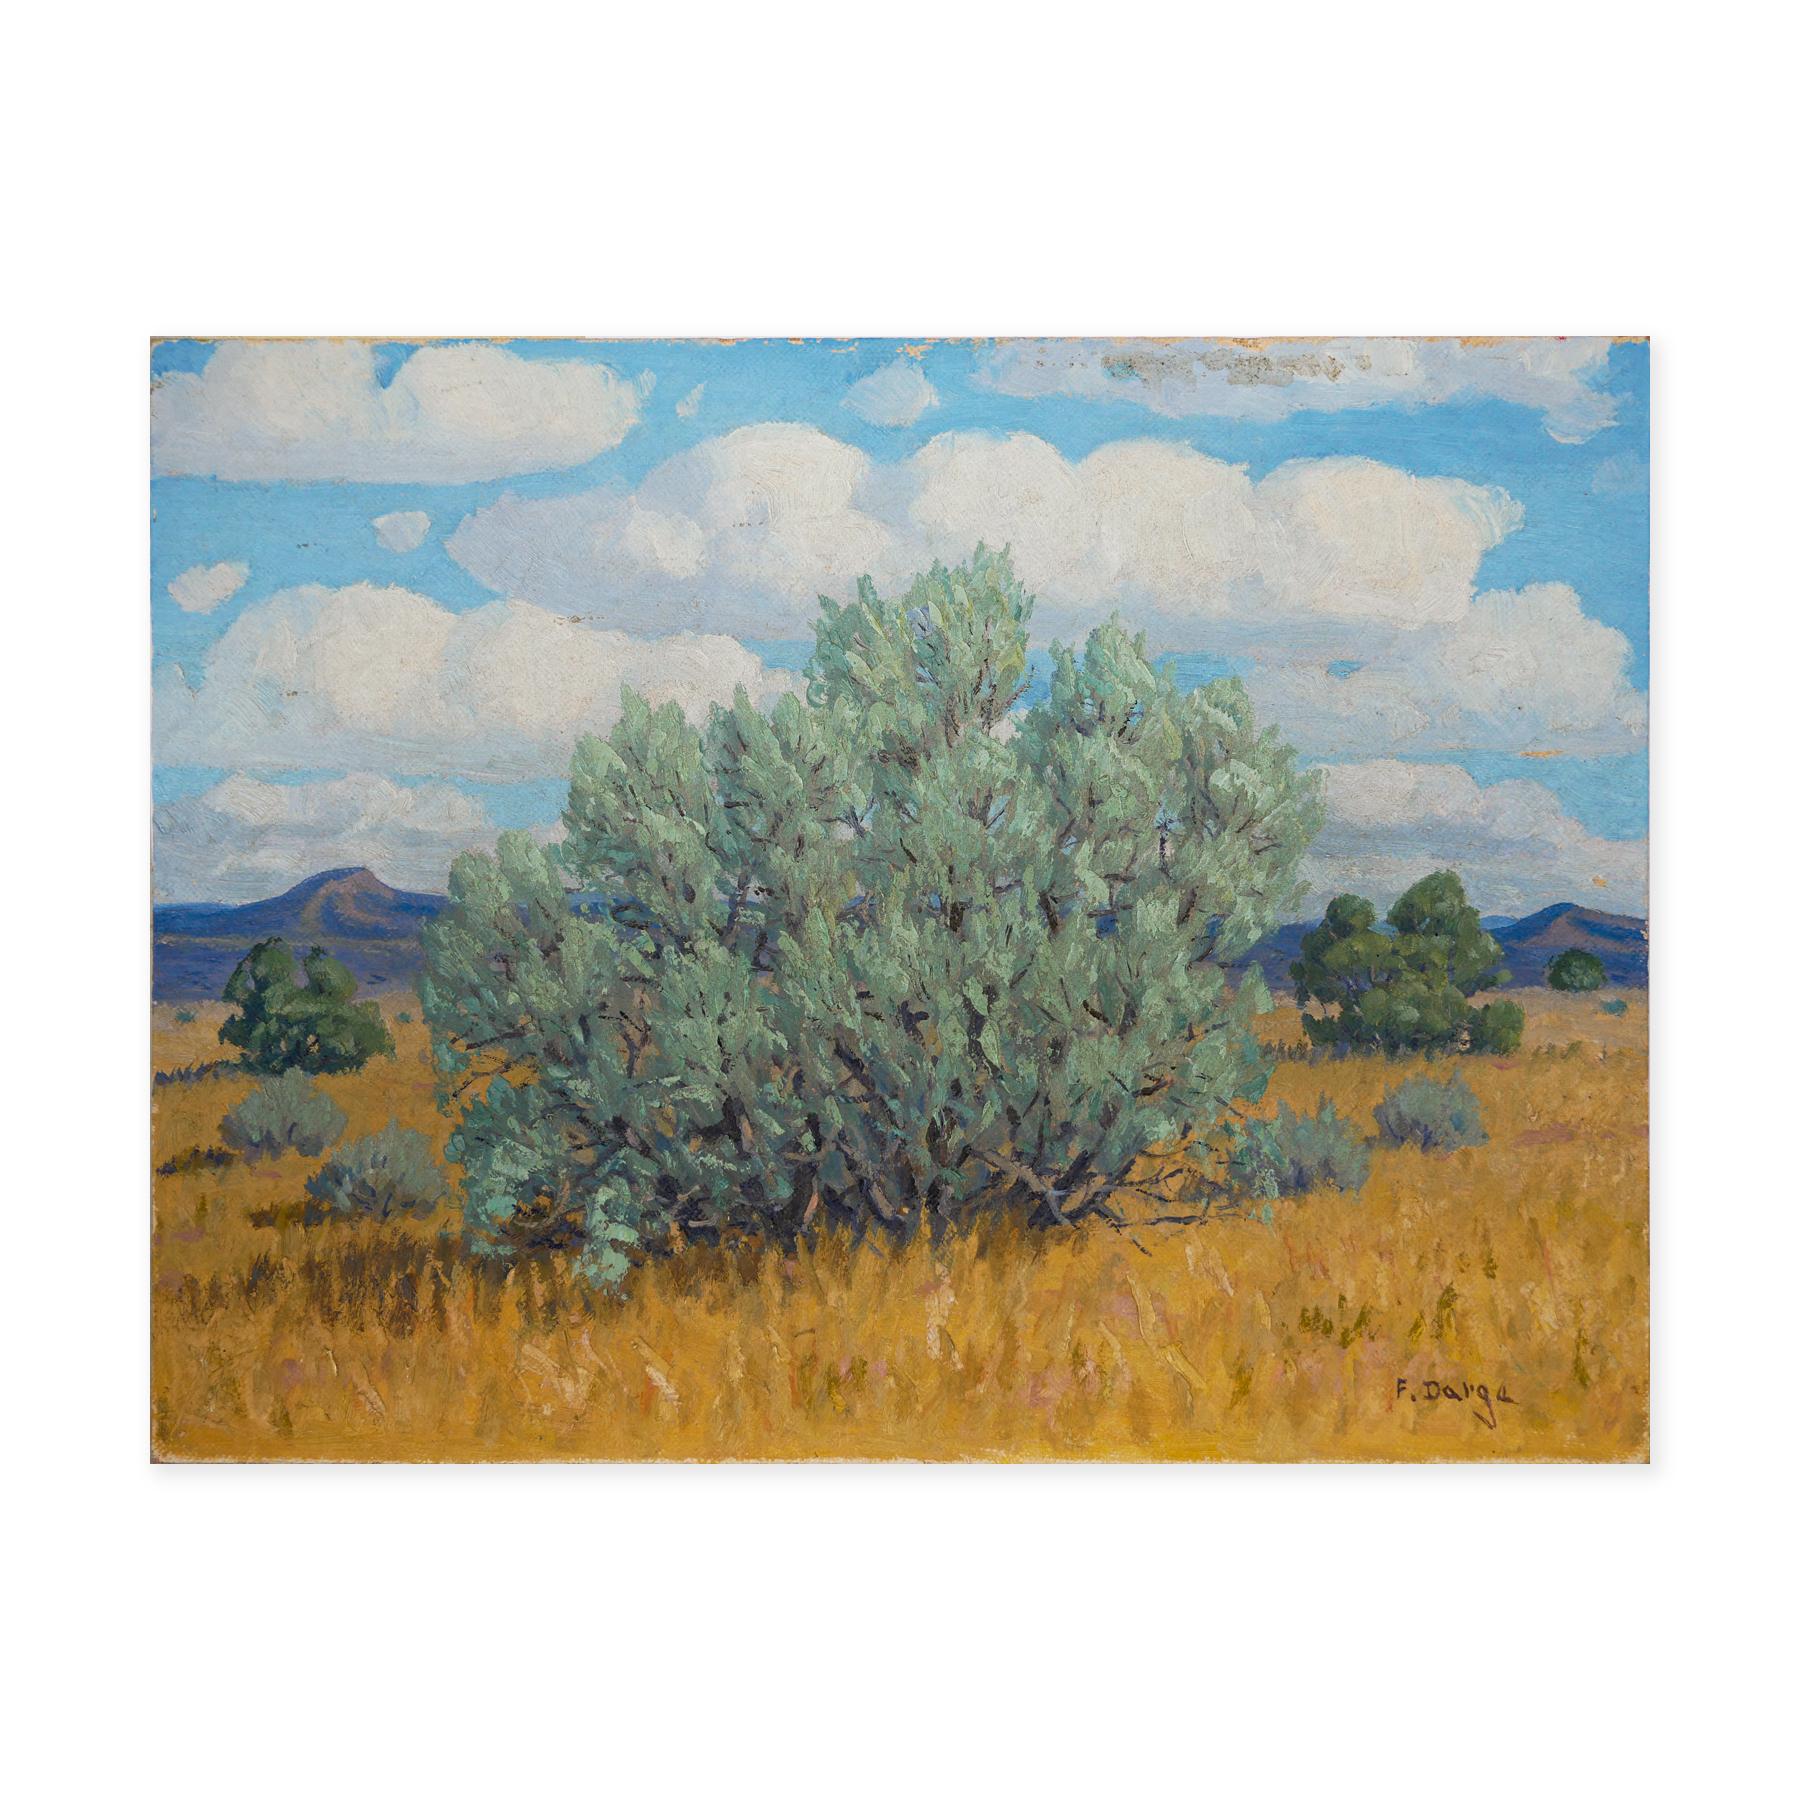 Green, Yellow, and Blue Abstract Impressionist Western Desert Landscape - Painting by Fred Darge